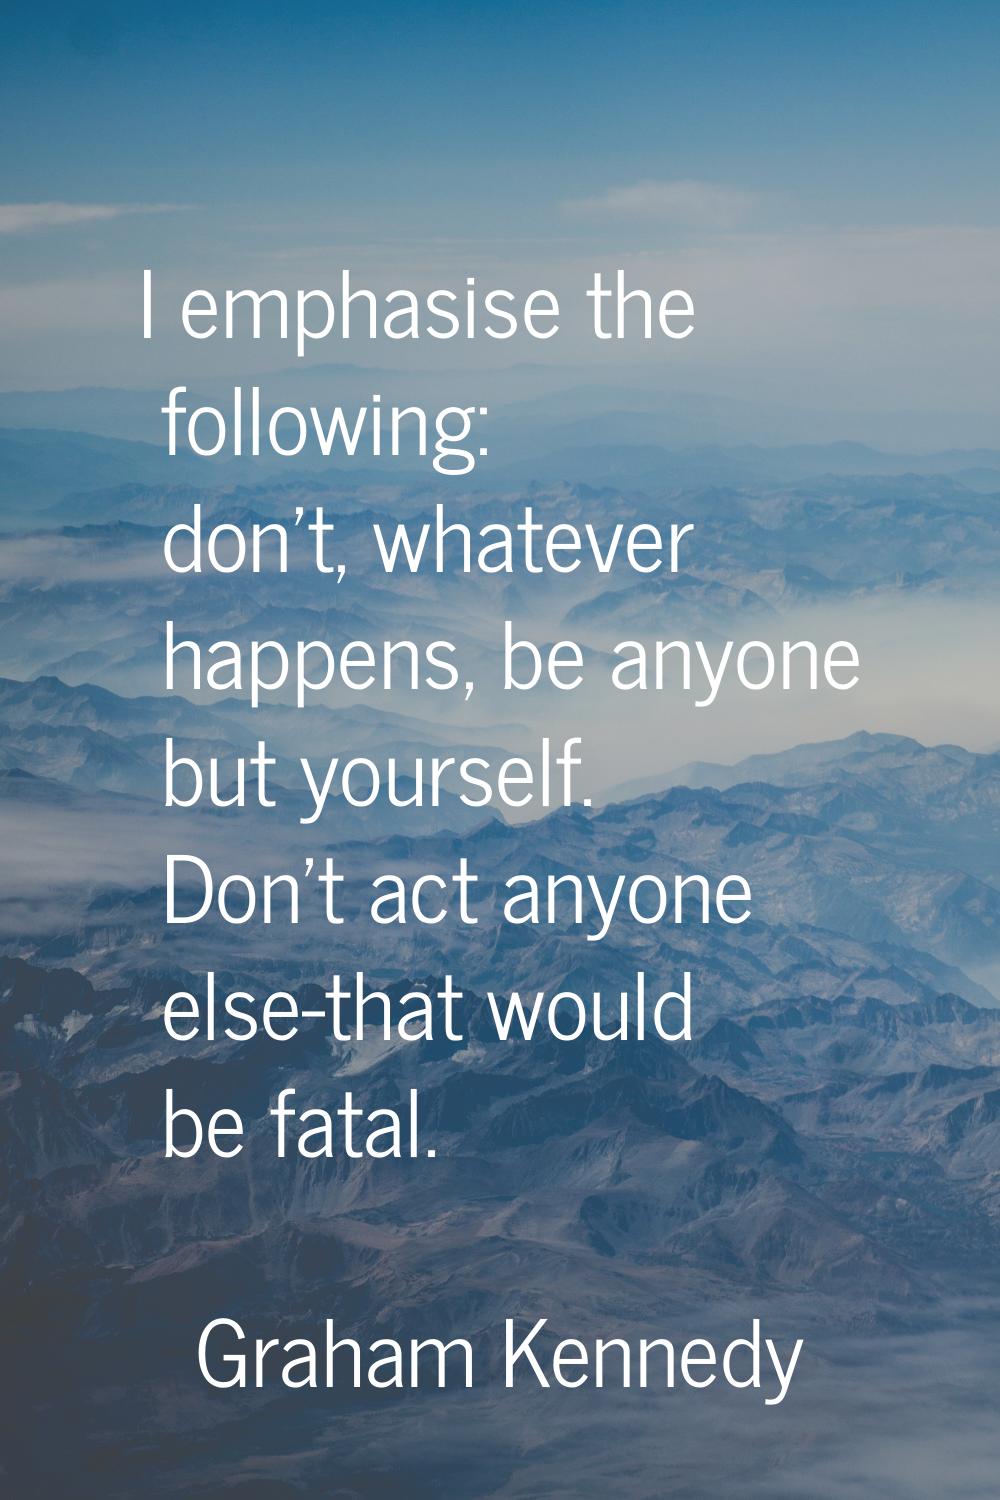 I emphasise the following: don't, whatever happens, be anyone but yourself. Don't act anyone else-t